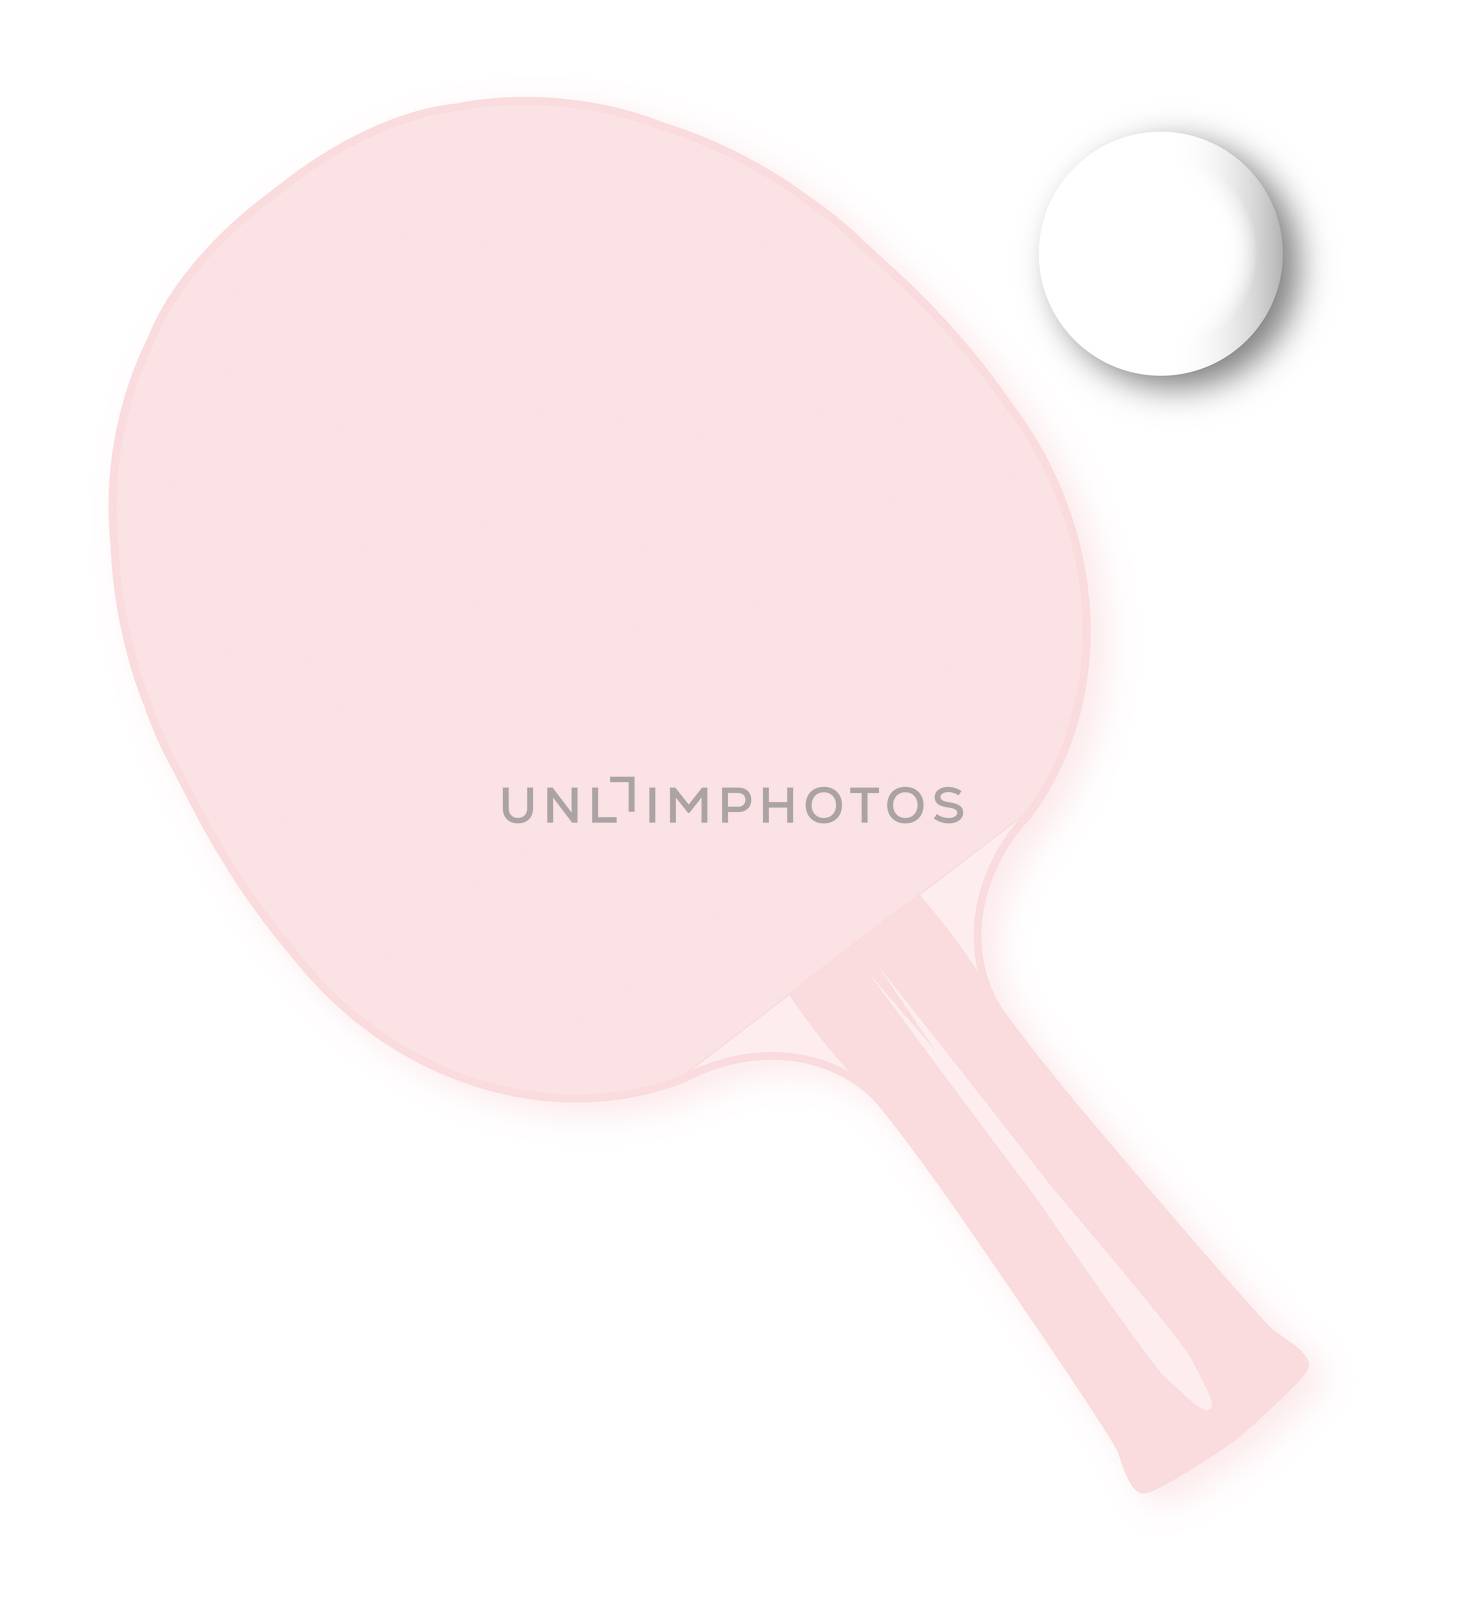 A faded table tennis bat or racket with ball over a white background